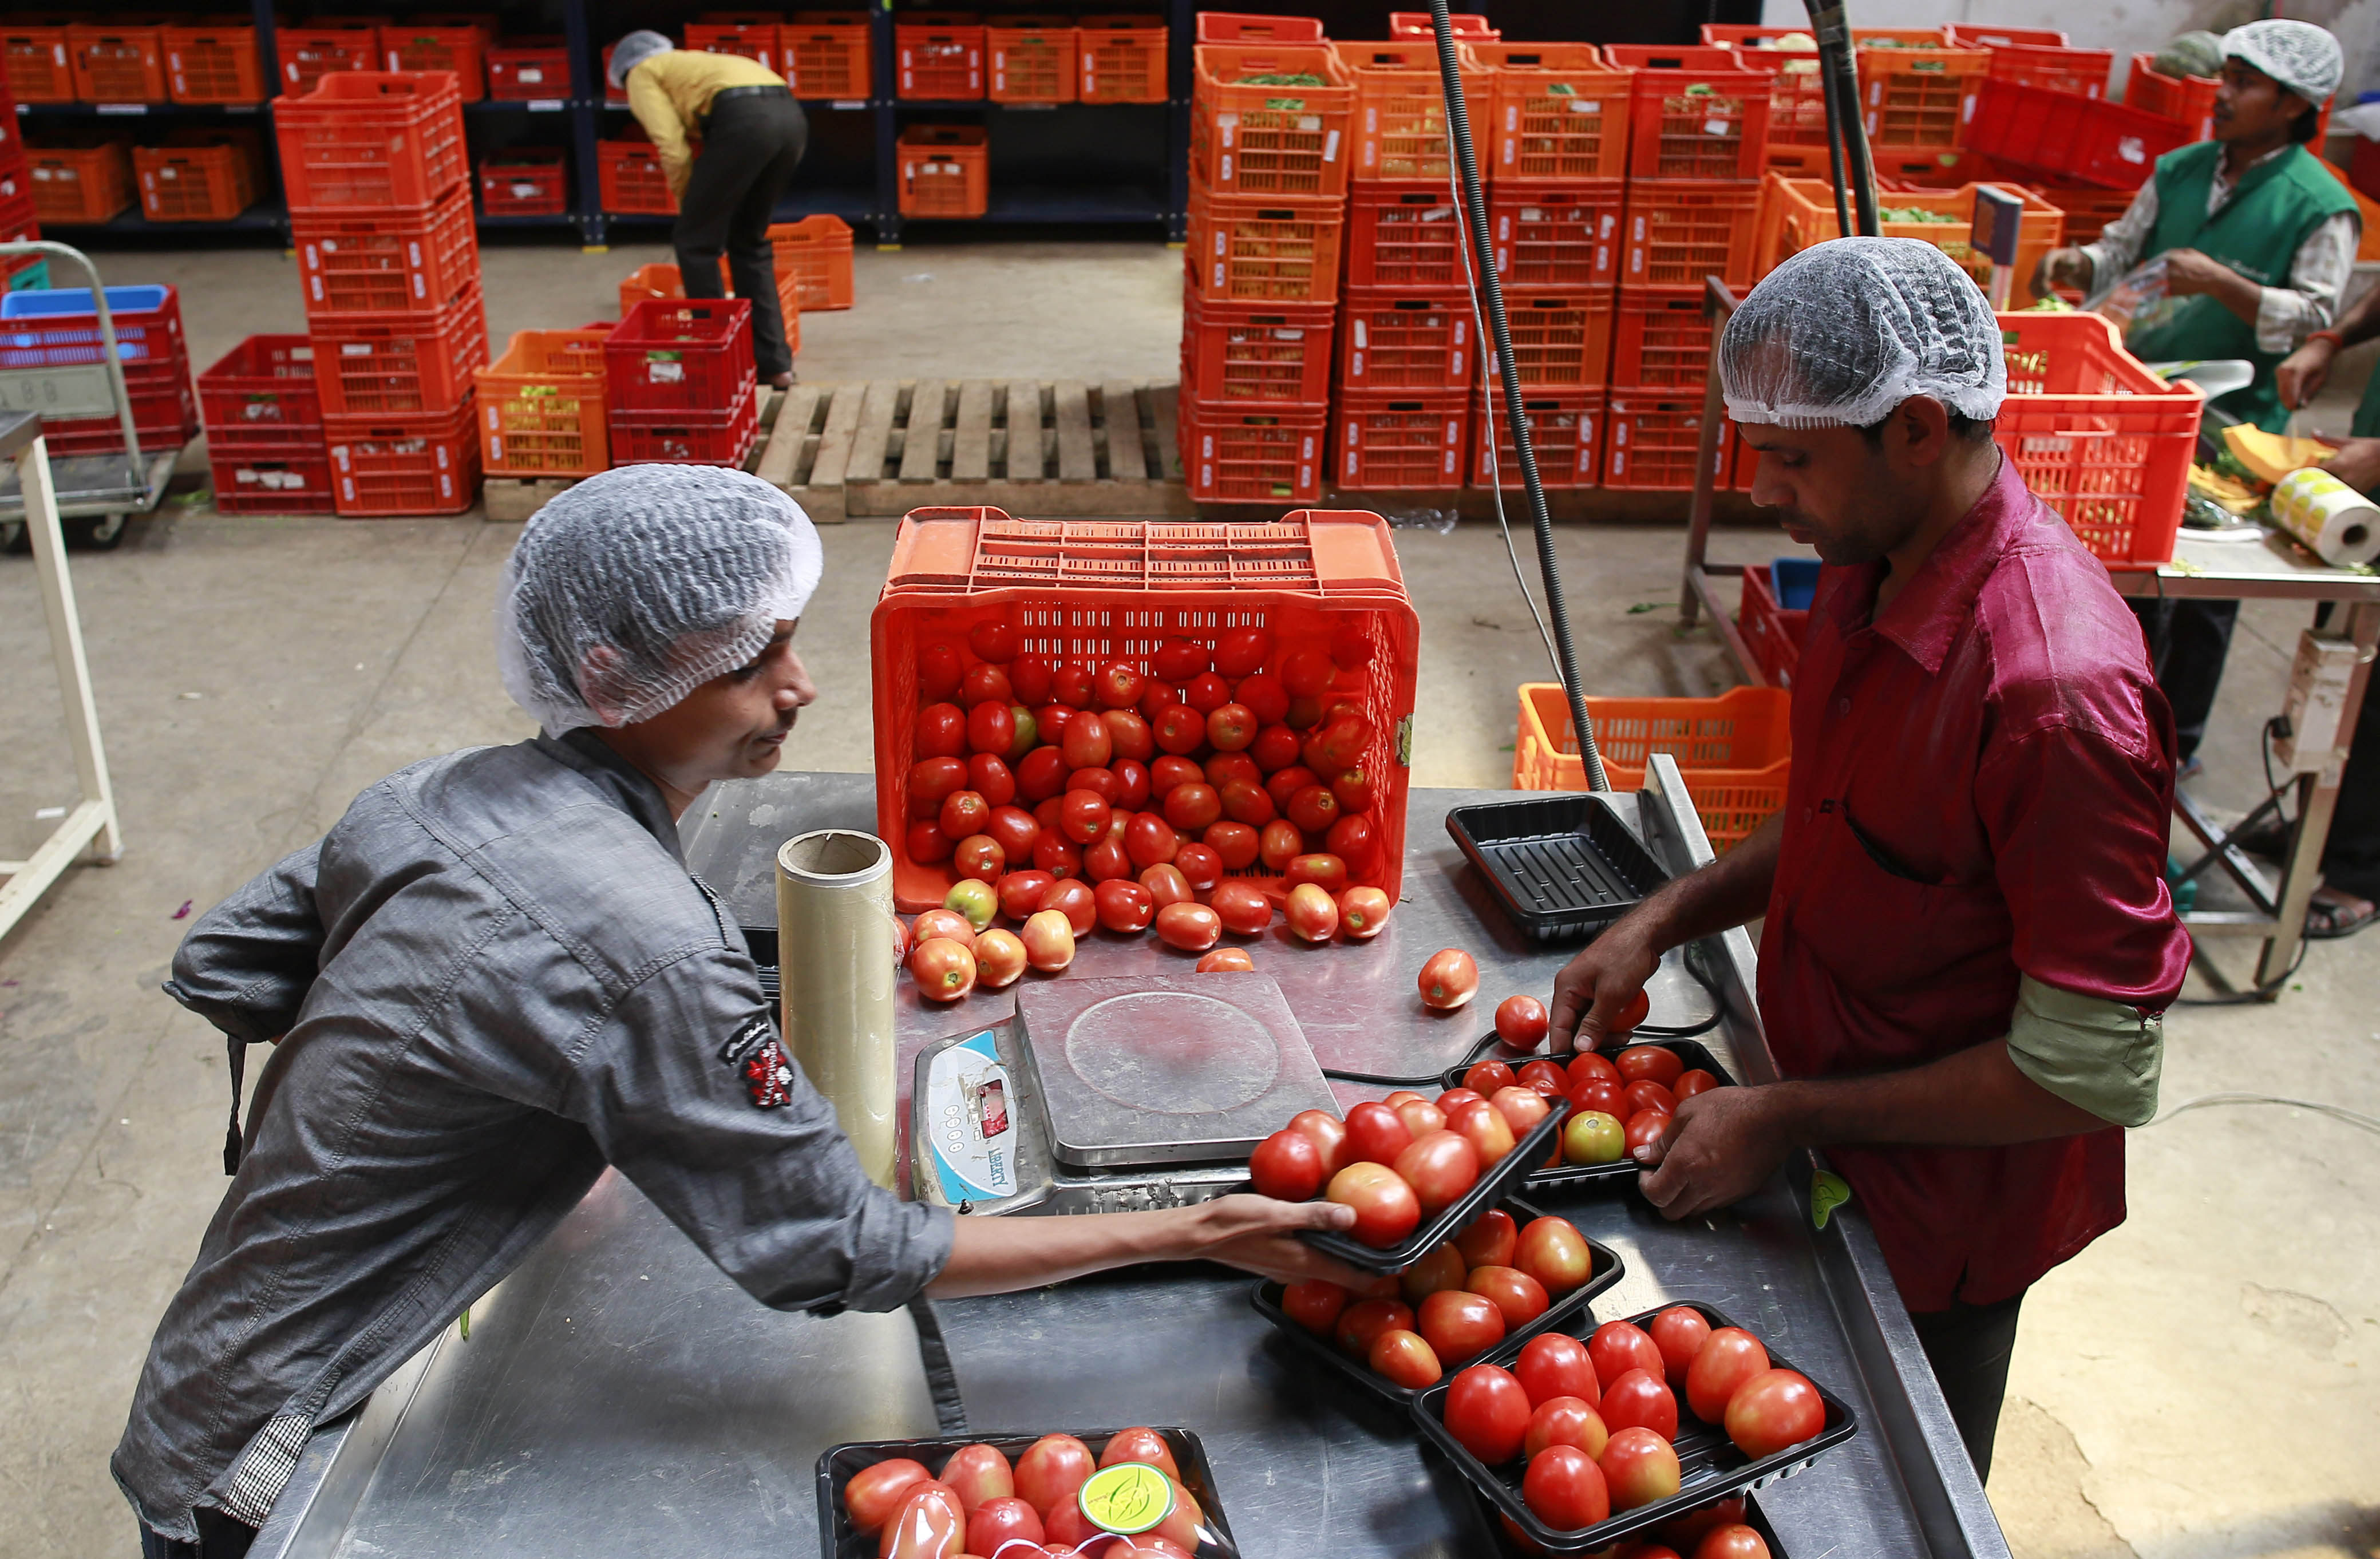 Employees arrange tomatoes before weighing them at a Big Basket warehouse on the outskirts of Mumbai